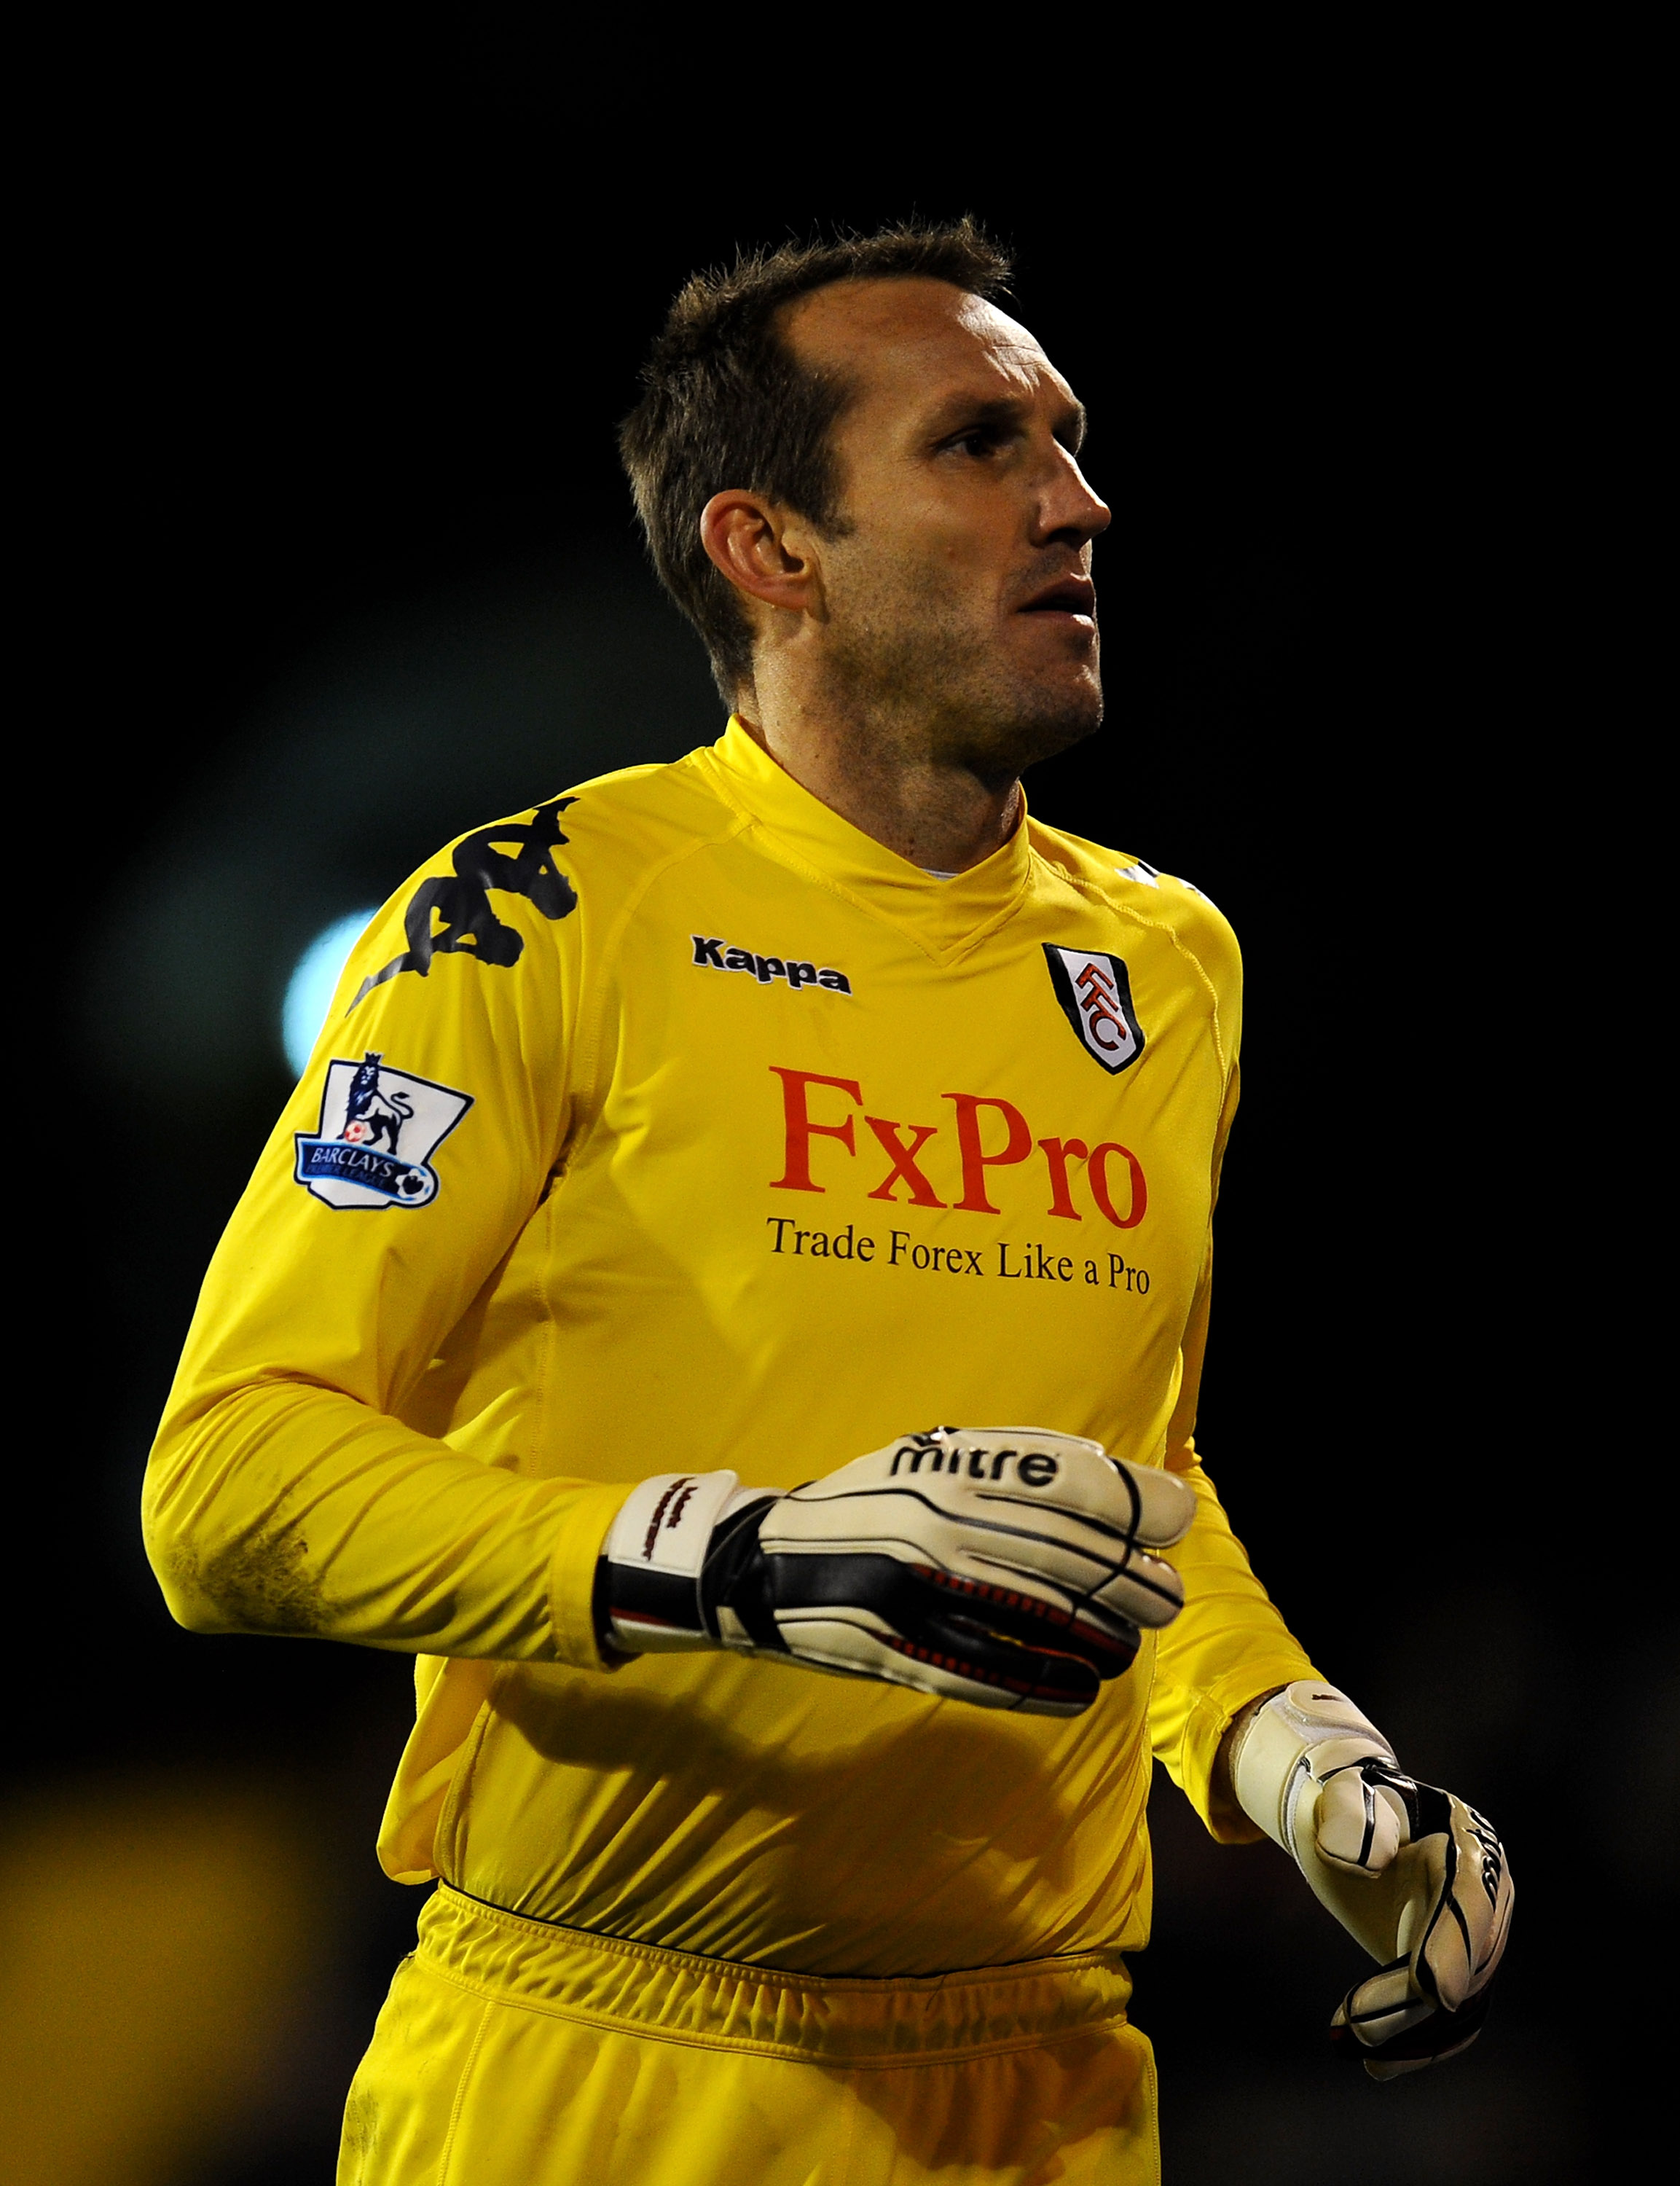 LONDON, ENGLAND - DECEMBER 11:  Mark Schwarzer of Fulham looks on during the Barclays Premier League match between Fulham and Sunderland at Craven Cottage on December 11, 2010 in London, England.  (Photo by Clive Mason/Getty Images)